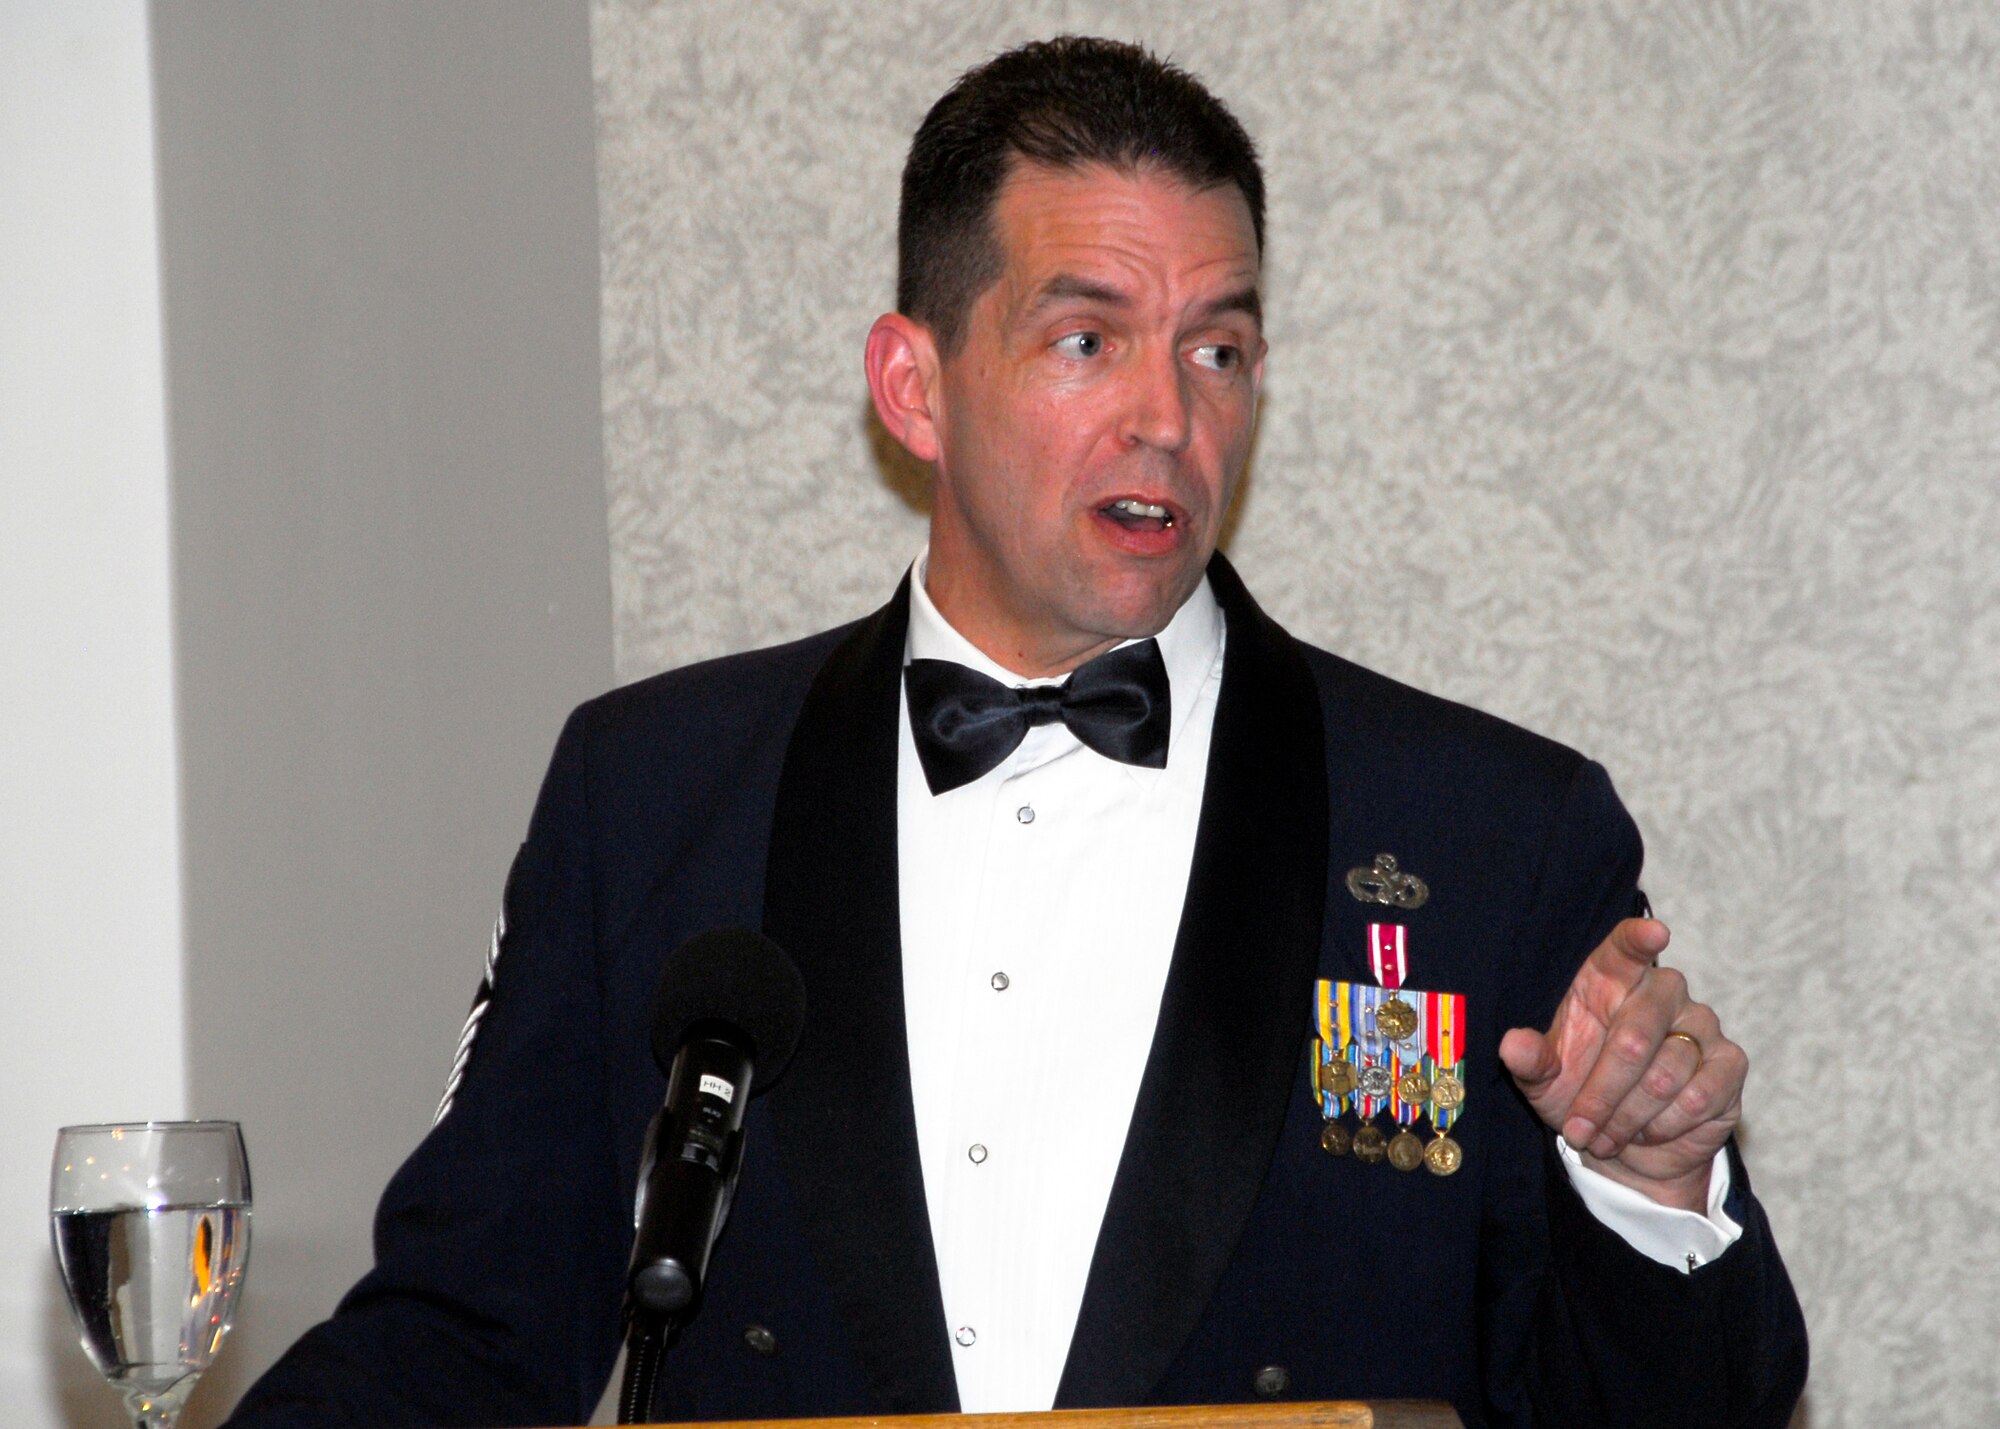 Command Chief of Air Education and Training Command, Chief Master Sgt. Robert Tappana speaks to the award winners and nominees about the factors of excellence during the 2009 82nd Training Wing Annual Awards banquet at the Sheppard Club March 5. (U.S. Air Force photo/Harry Tonemah)